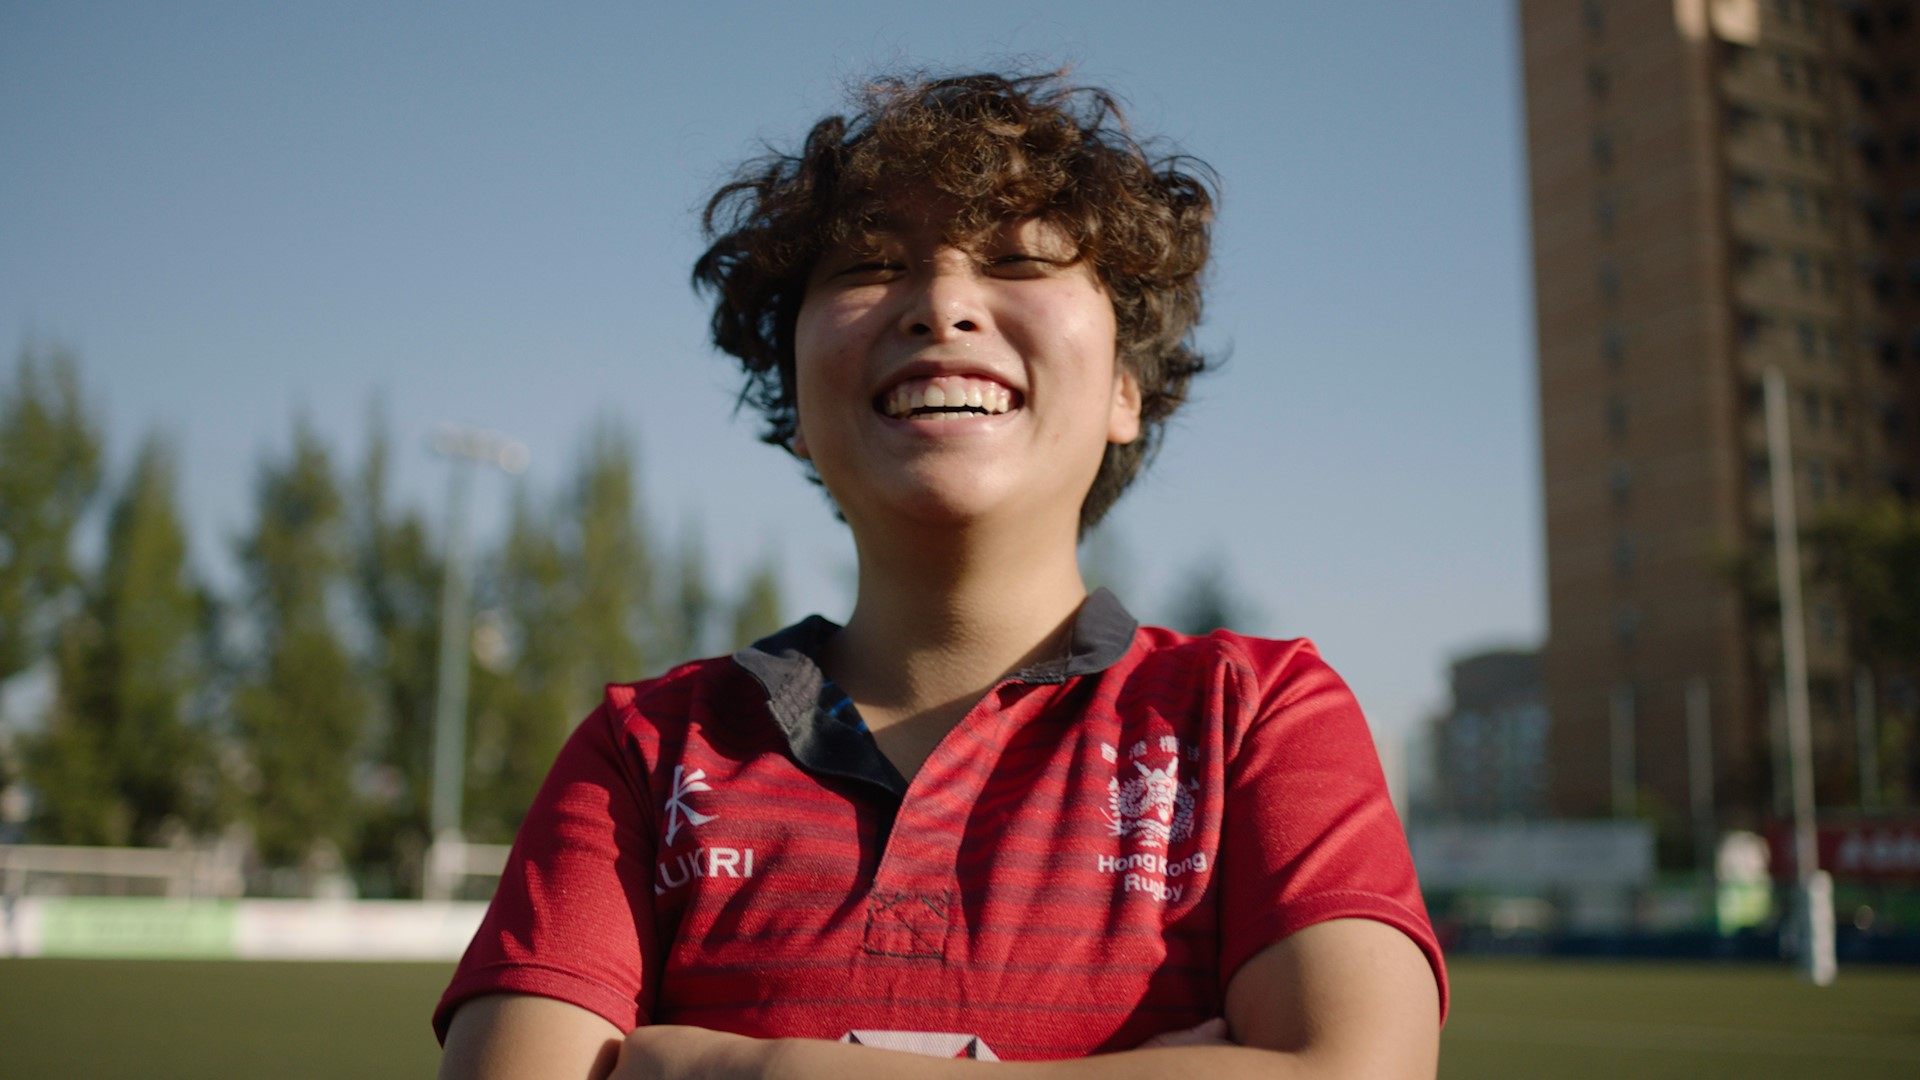 The HSBC Try Rugby Programme aims to introduce the sport to students of all abilities and genders by incorporating rugby into the PE curriculum of more schools.